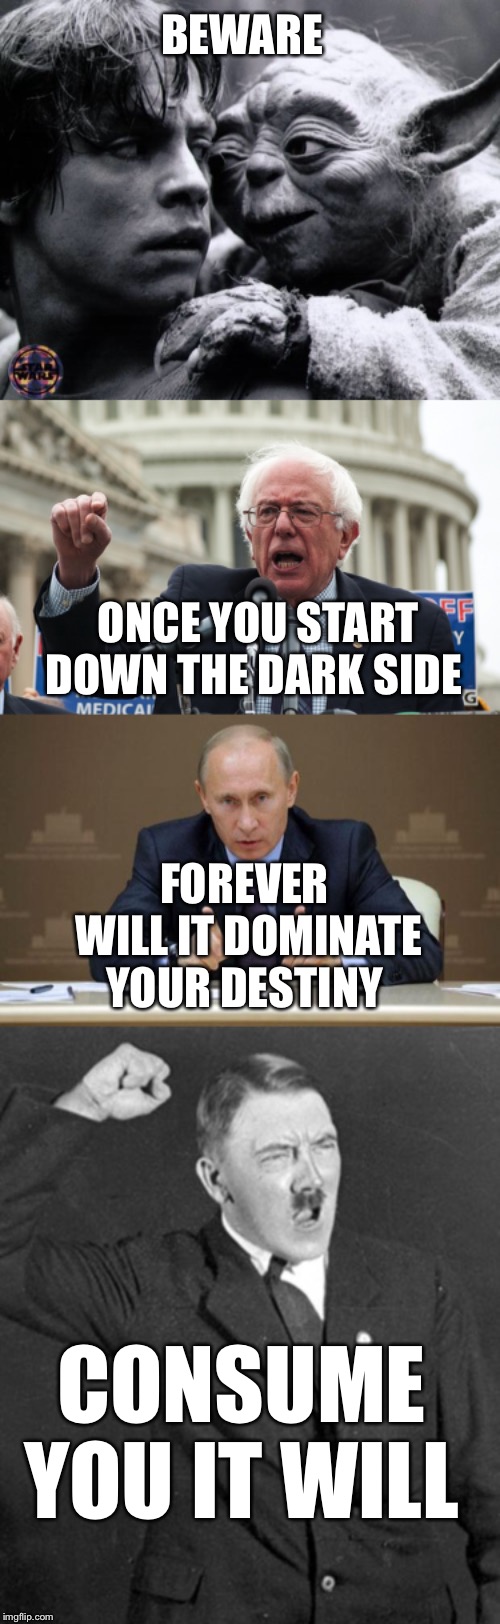 It starts with socialism and free stuff | BEWARE; ONCE YOU START DOWN THE DARK SIDE; FOREVER WILL IT DOMINATE YOUR DESTINY; CONSUME YOU IT WILL | image tagged in memes,vladimir putin,angry hitler,yoda  luke,bernie sanders,socialism | made w/ Imgflip meme maker